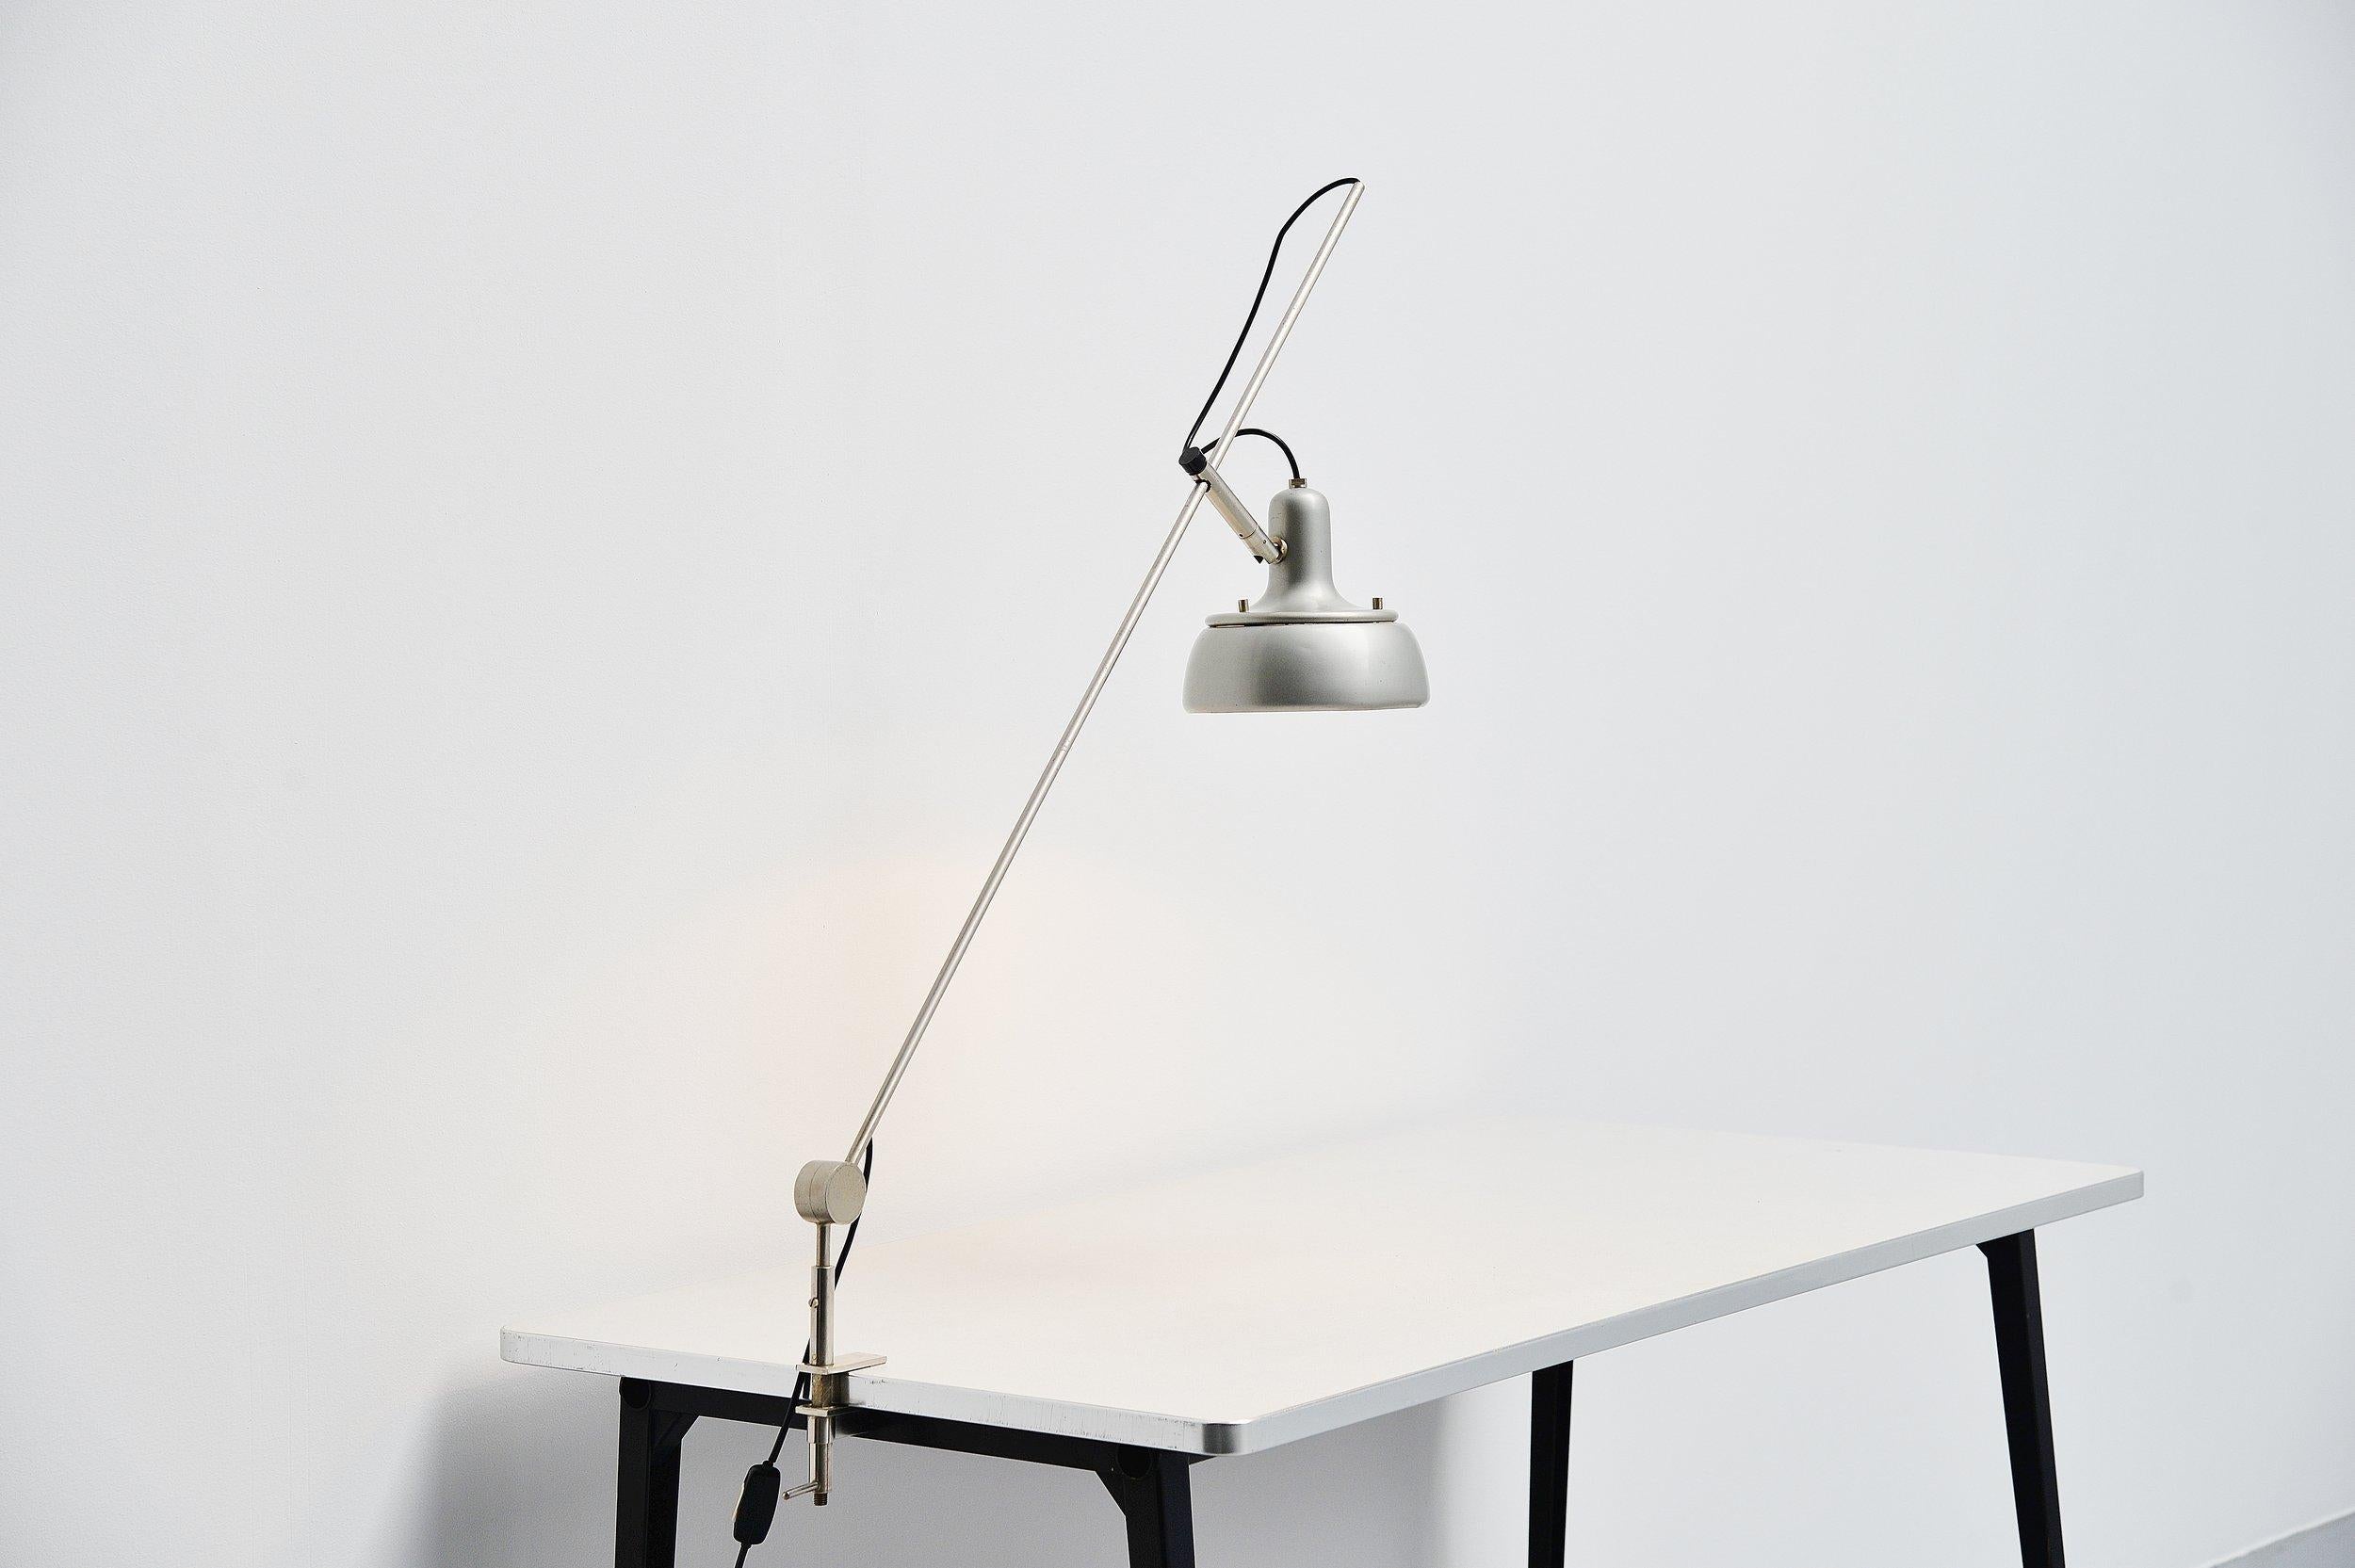 Very rare desk clamp lamp model 292-r designed by Giuseppe Ostuni and manufactured by Oluce, Italy 1950. This lamp is the precursor of the similar but smaller desk lamp designed bu Tito Agnoli, model 255. This lamp is much bigger, more impressive